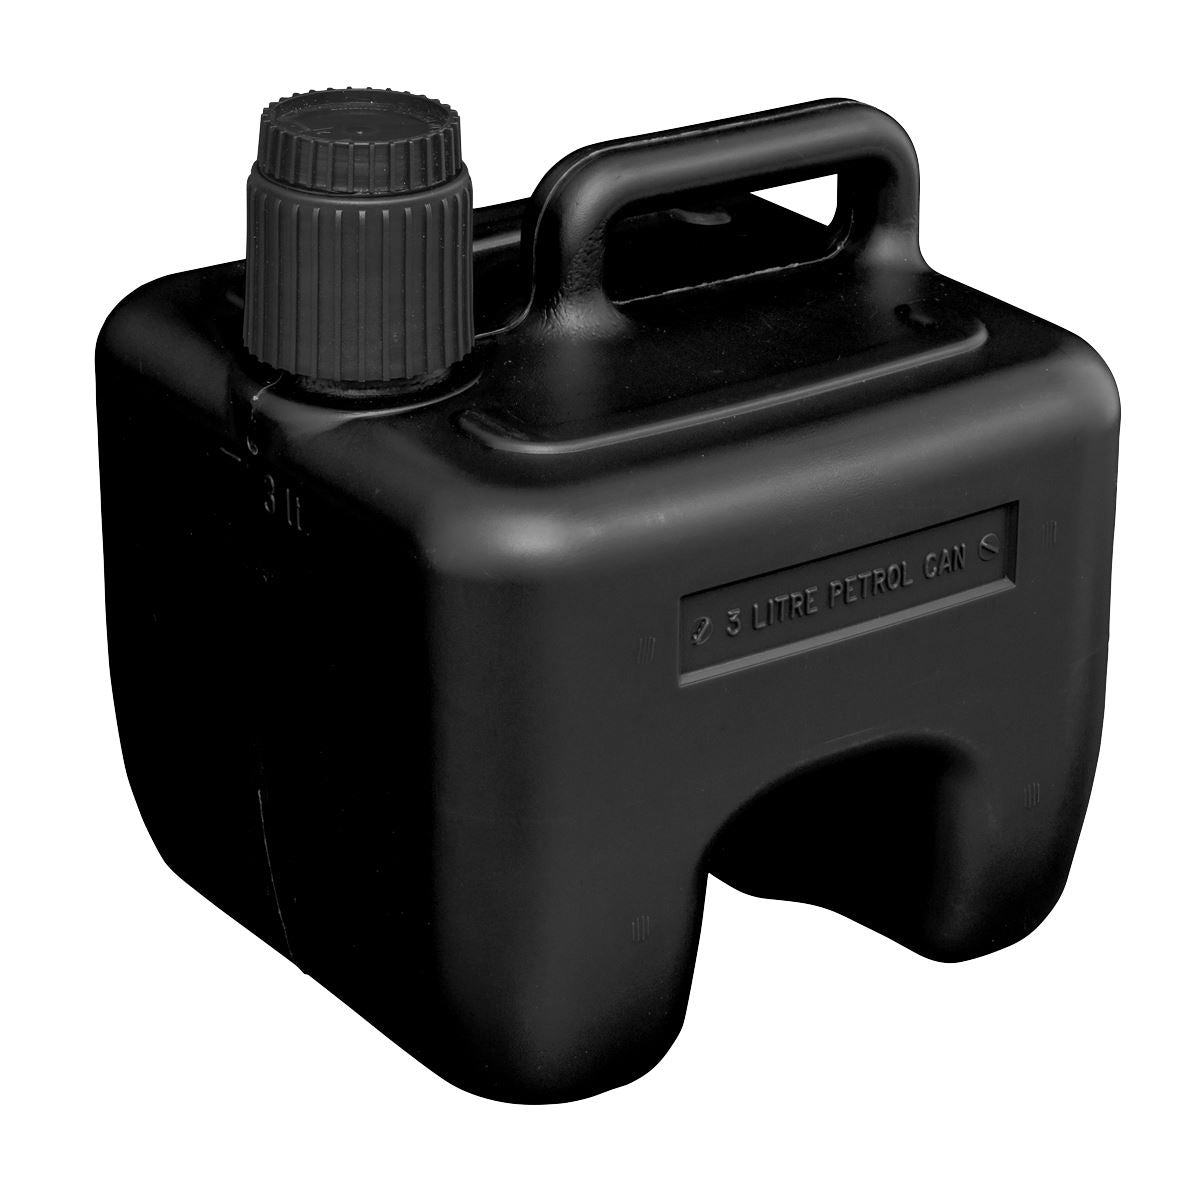 Sealey Stackable Fuel Can 3L - Black